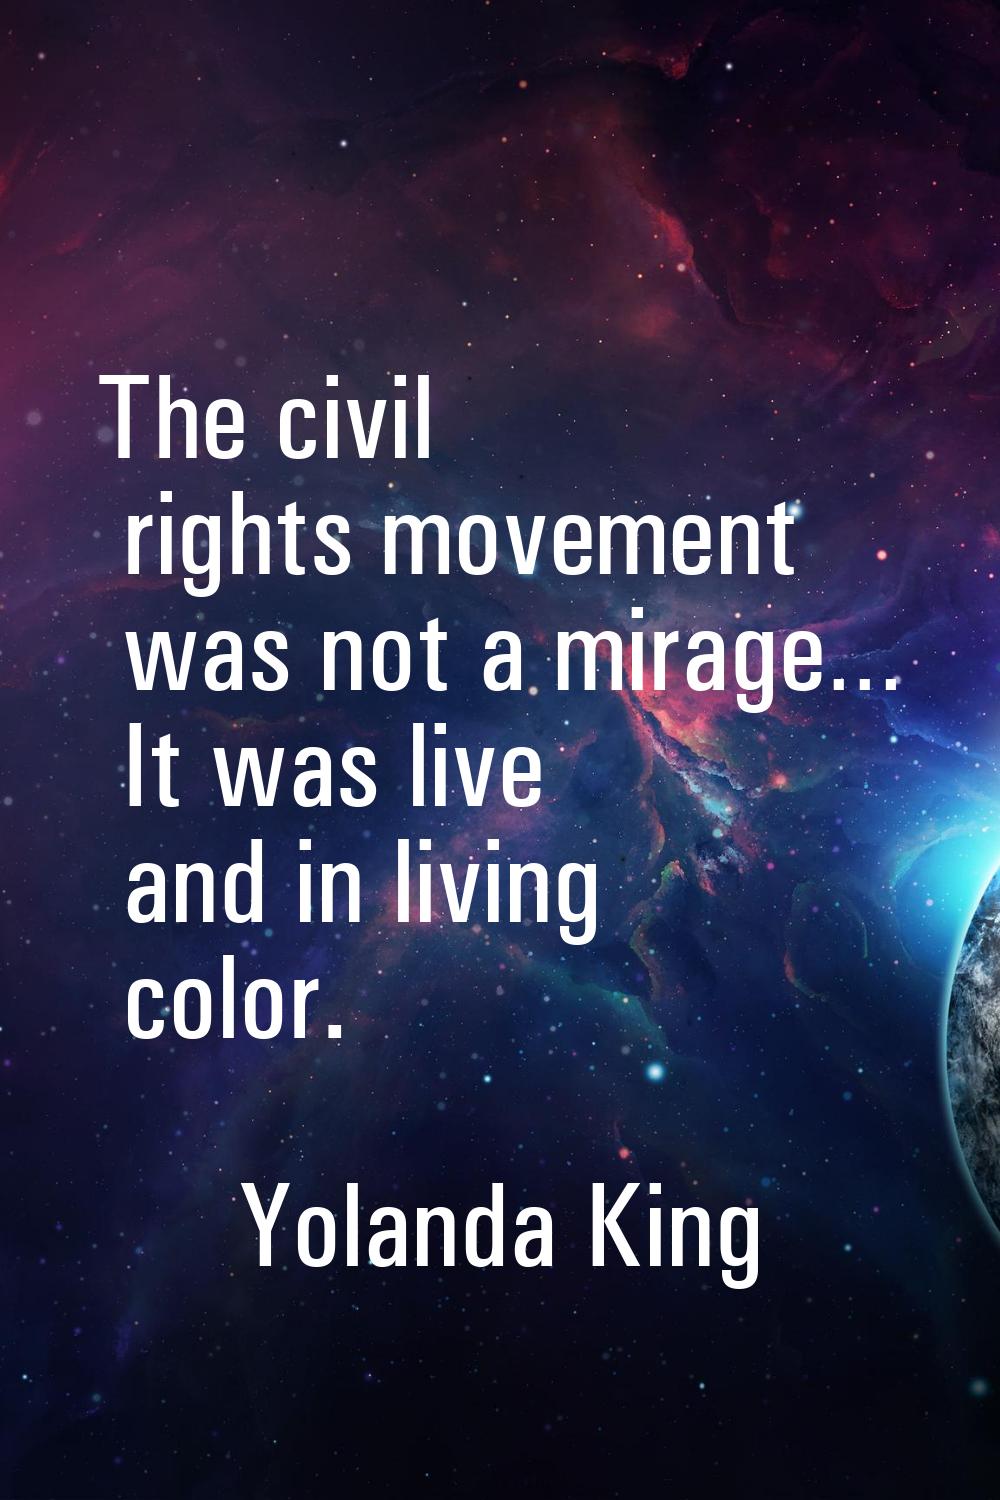 The civil rights movement was not a mirage… It was live and in living color.